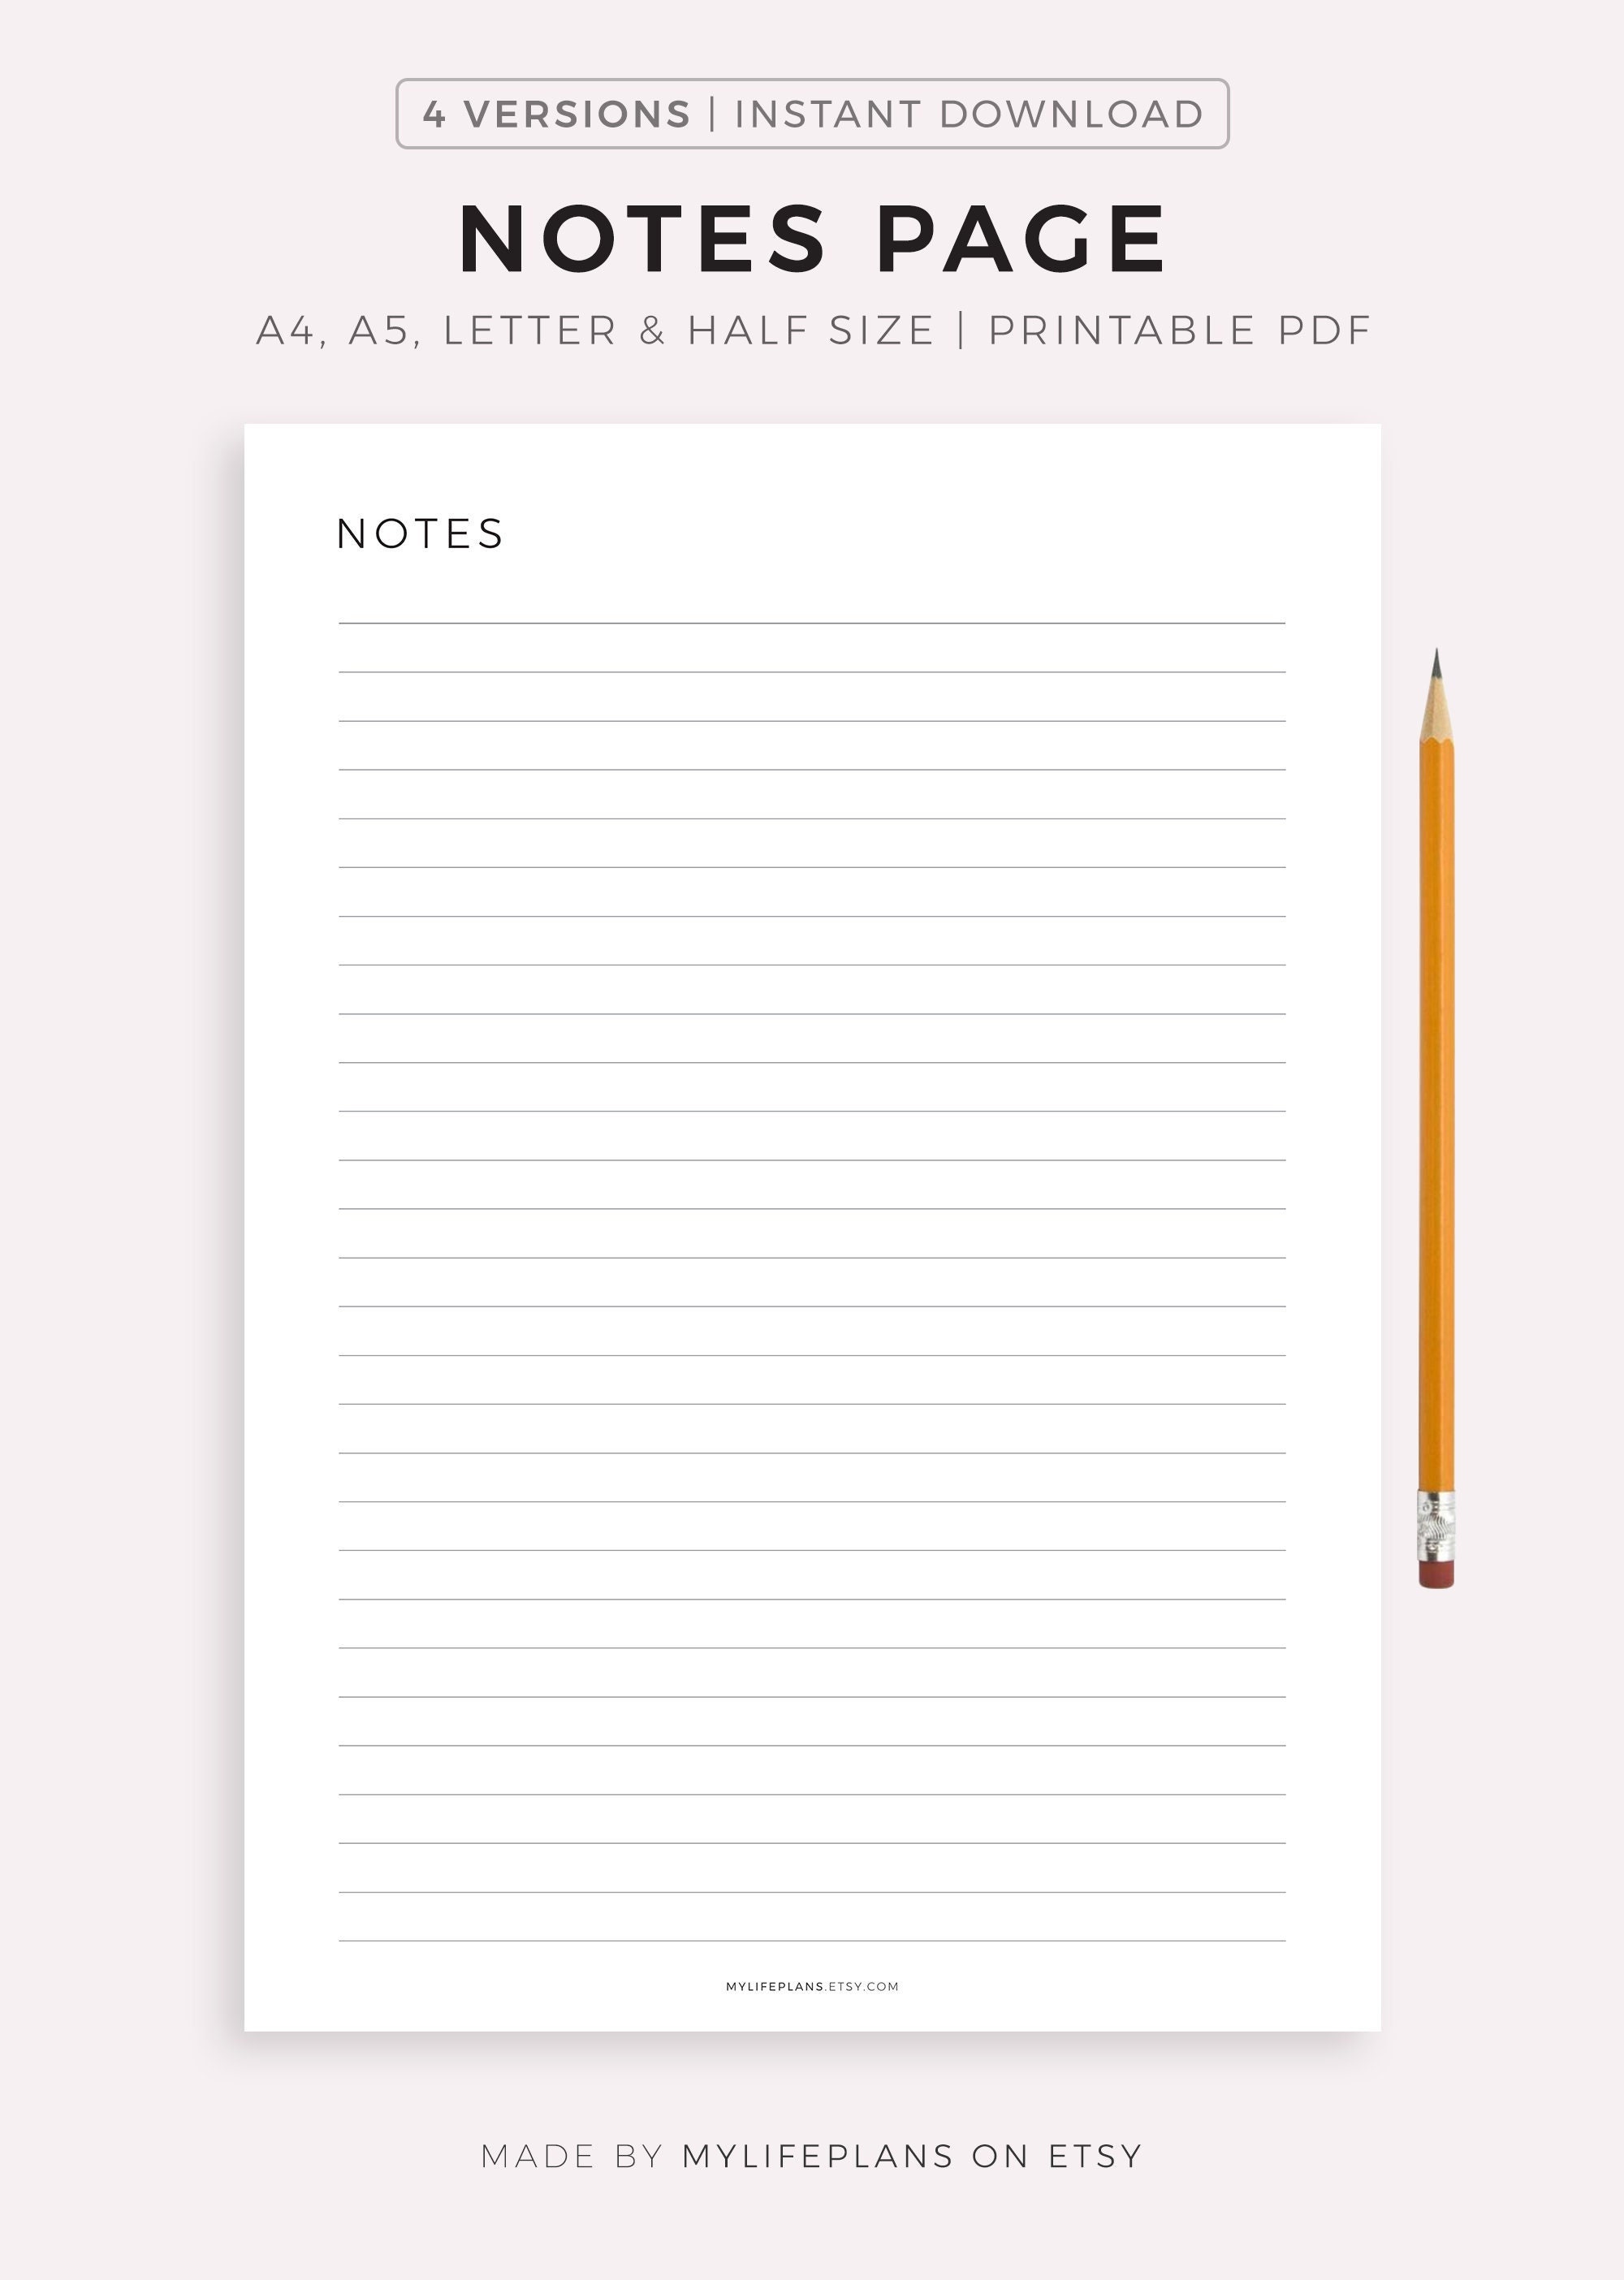 paper-a4-a5-us-letter-notes-planner-insert-notes-page-planner-printable